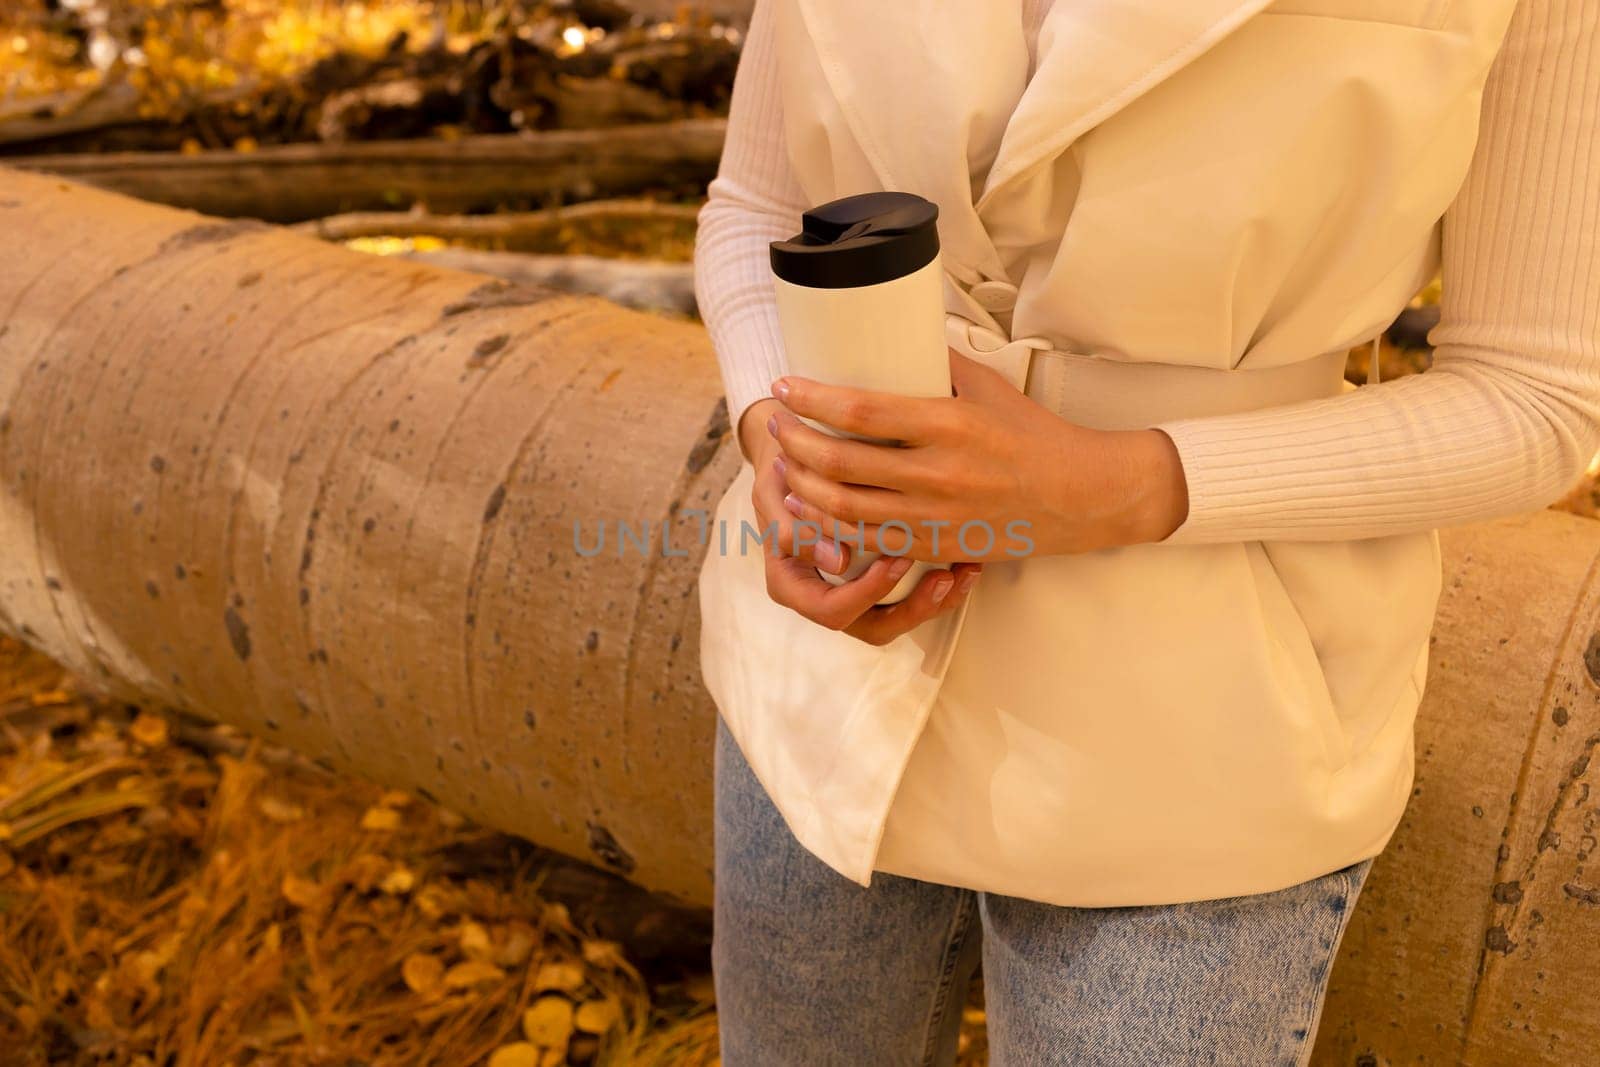 Caucasian Female Drinks Autumn Beverage From Thermos, Travel Mug Outside In Park Or Forest, Wears Warm Beige Vest. Hot Tea Or Coffee, Fall Leaves Season. Horizontal Plane Yellow background. Copyspace.